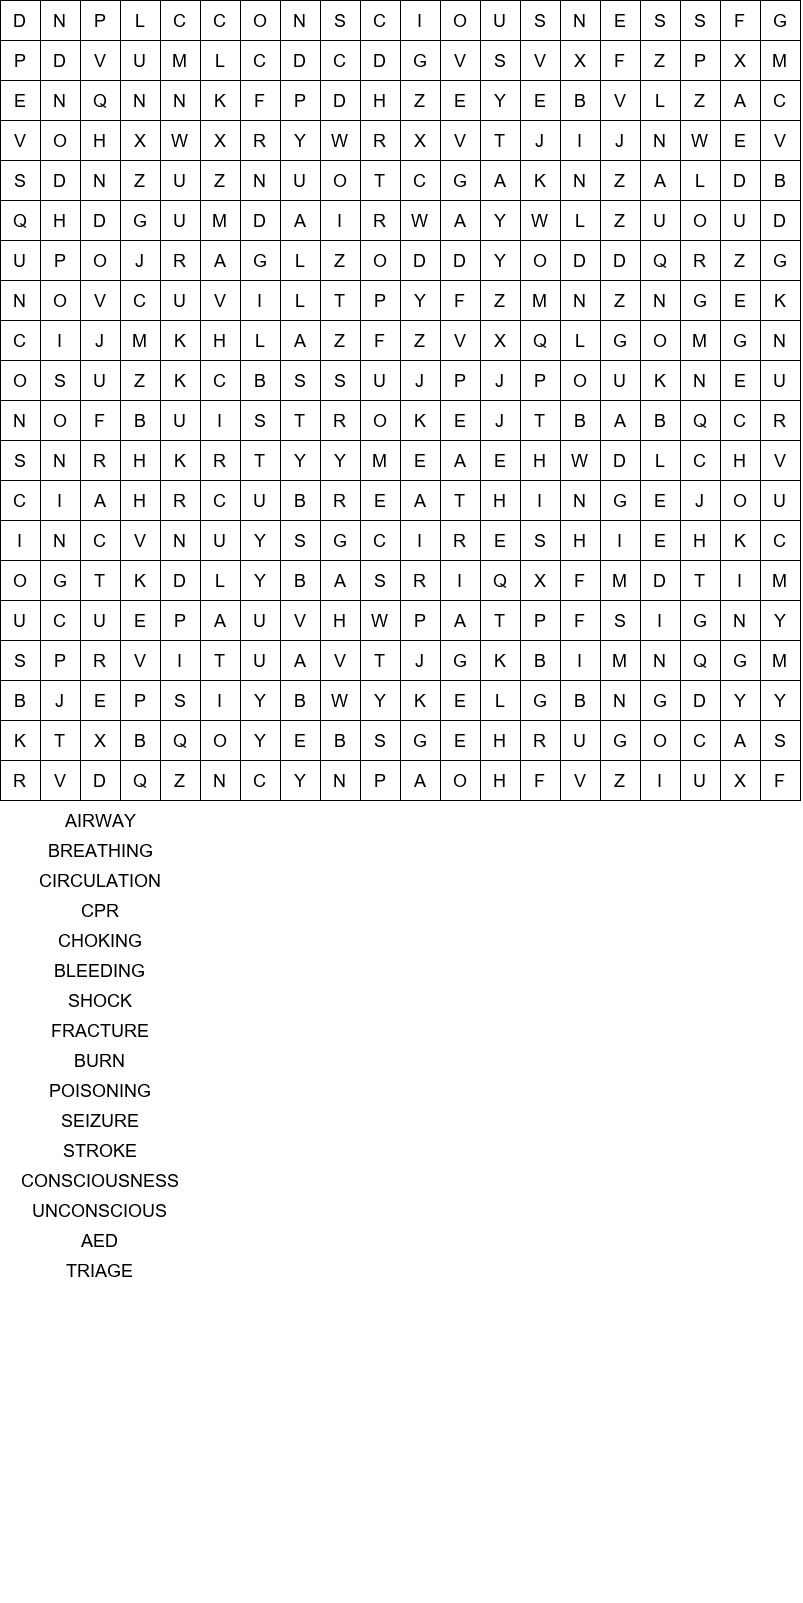 FIRST AID CPR WORD SEARCH ANSWERS SIZE 20x20